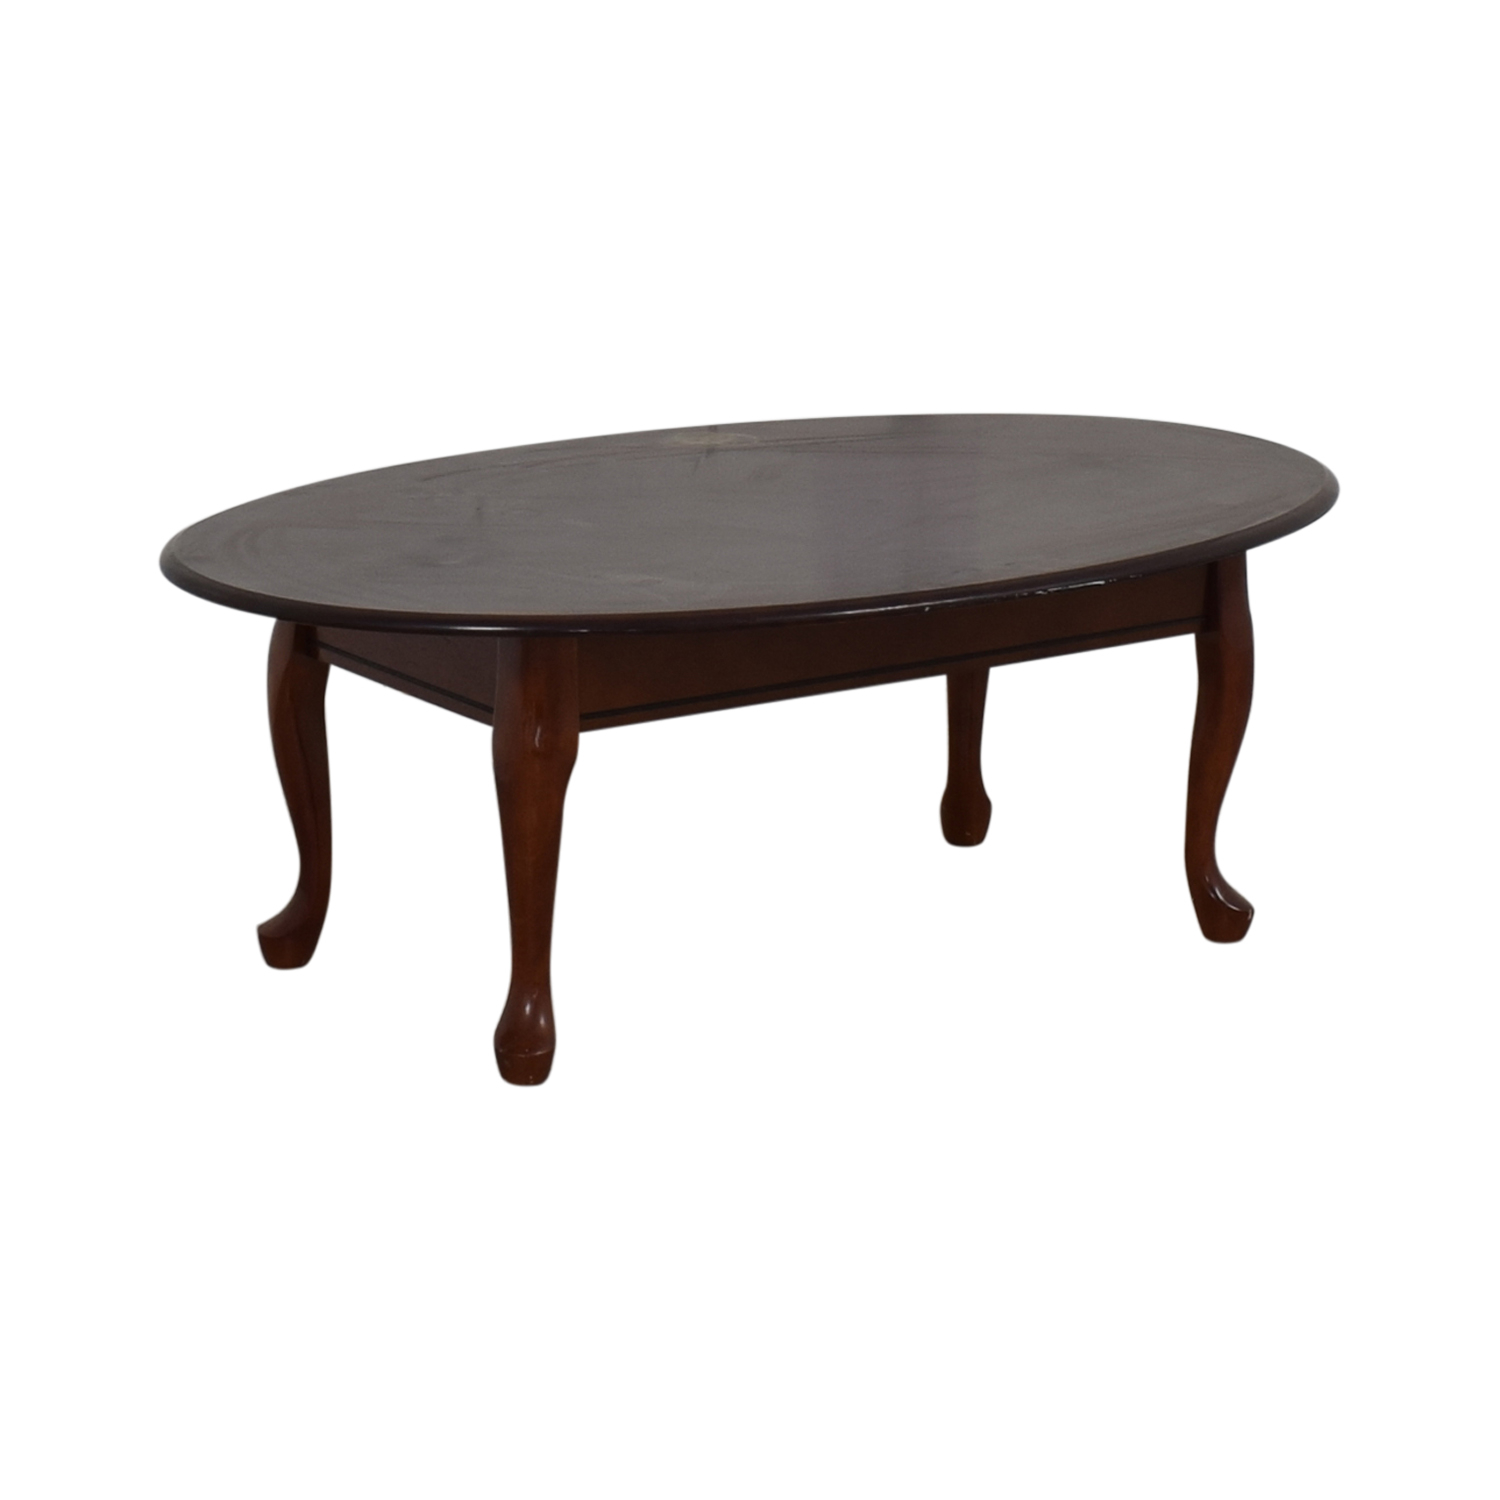 90 Off Cort Cherry Wood Coffee Table Tables intended for size 1500 X 1500